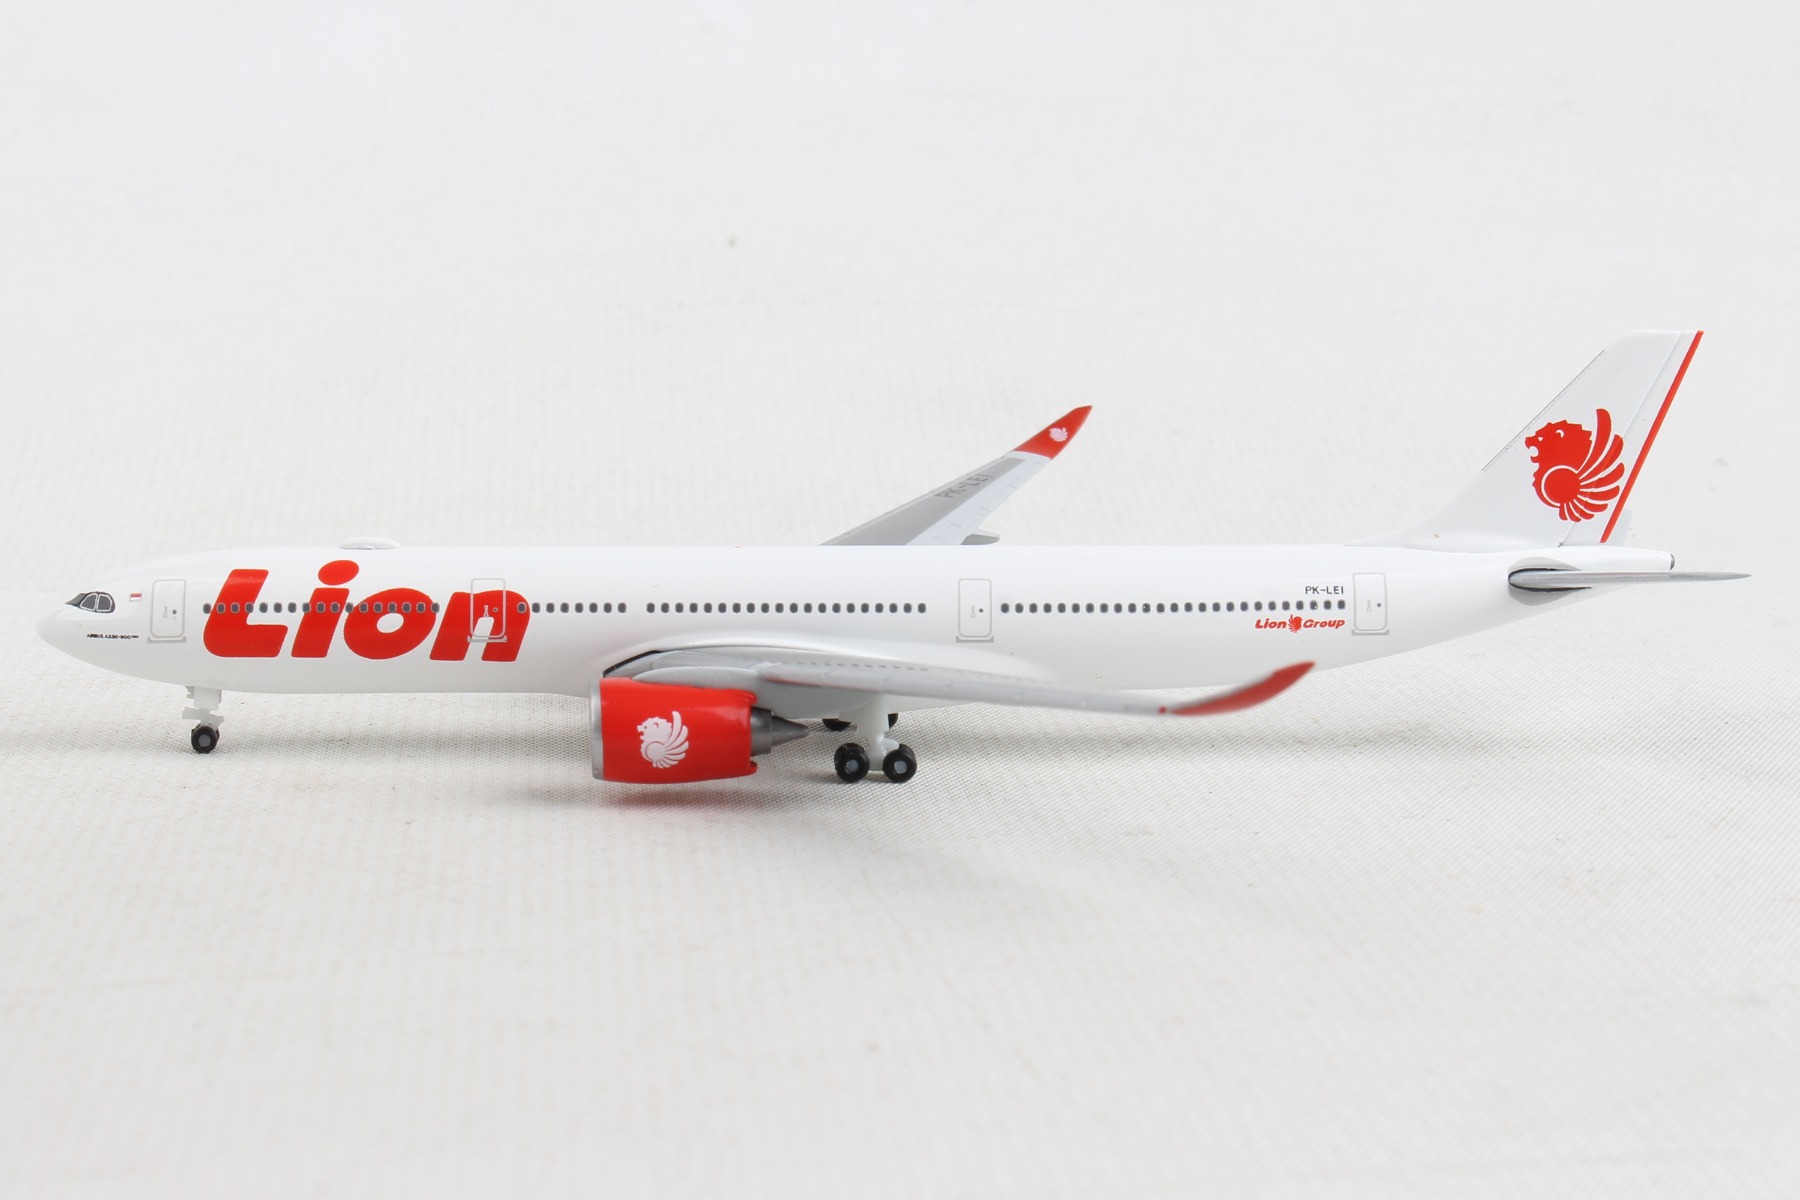 1:400 Diecast Metal Plane Model Toy Airbus A340-300 Air Asia Airliner Replica 